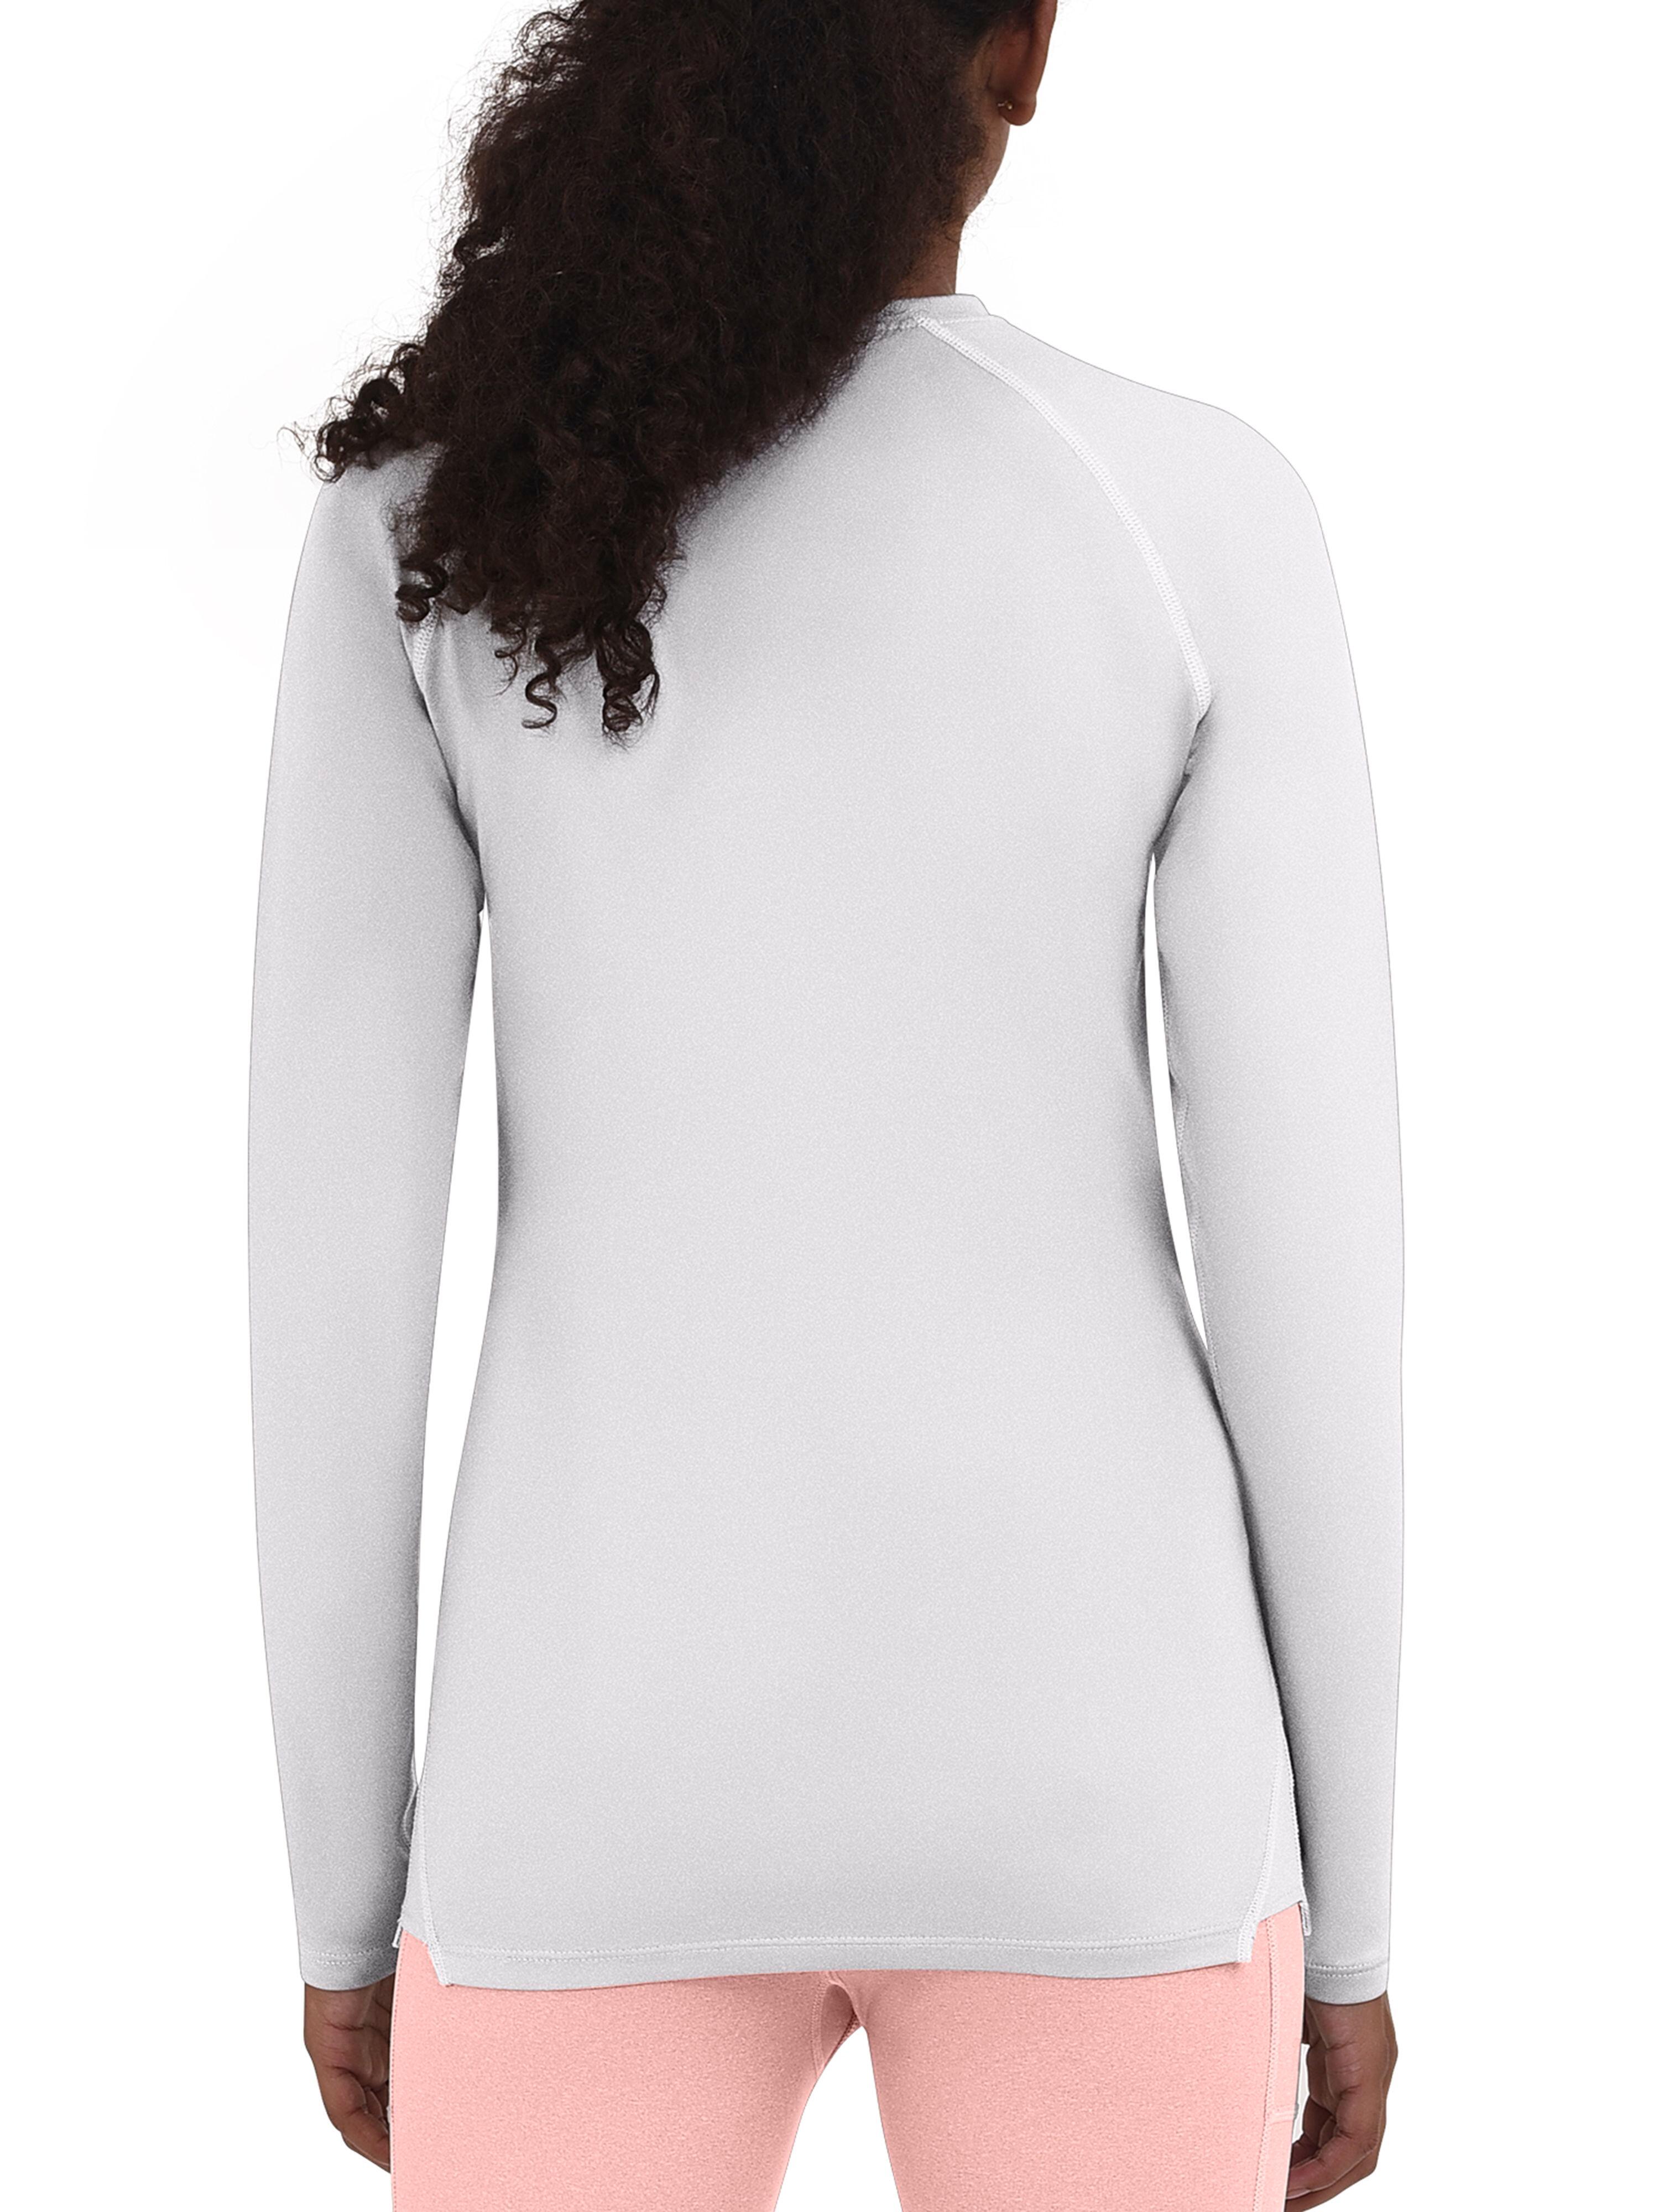 Girls' Super Thermal Base Layer Top - Cloud White 3/5